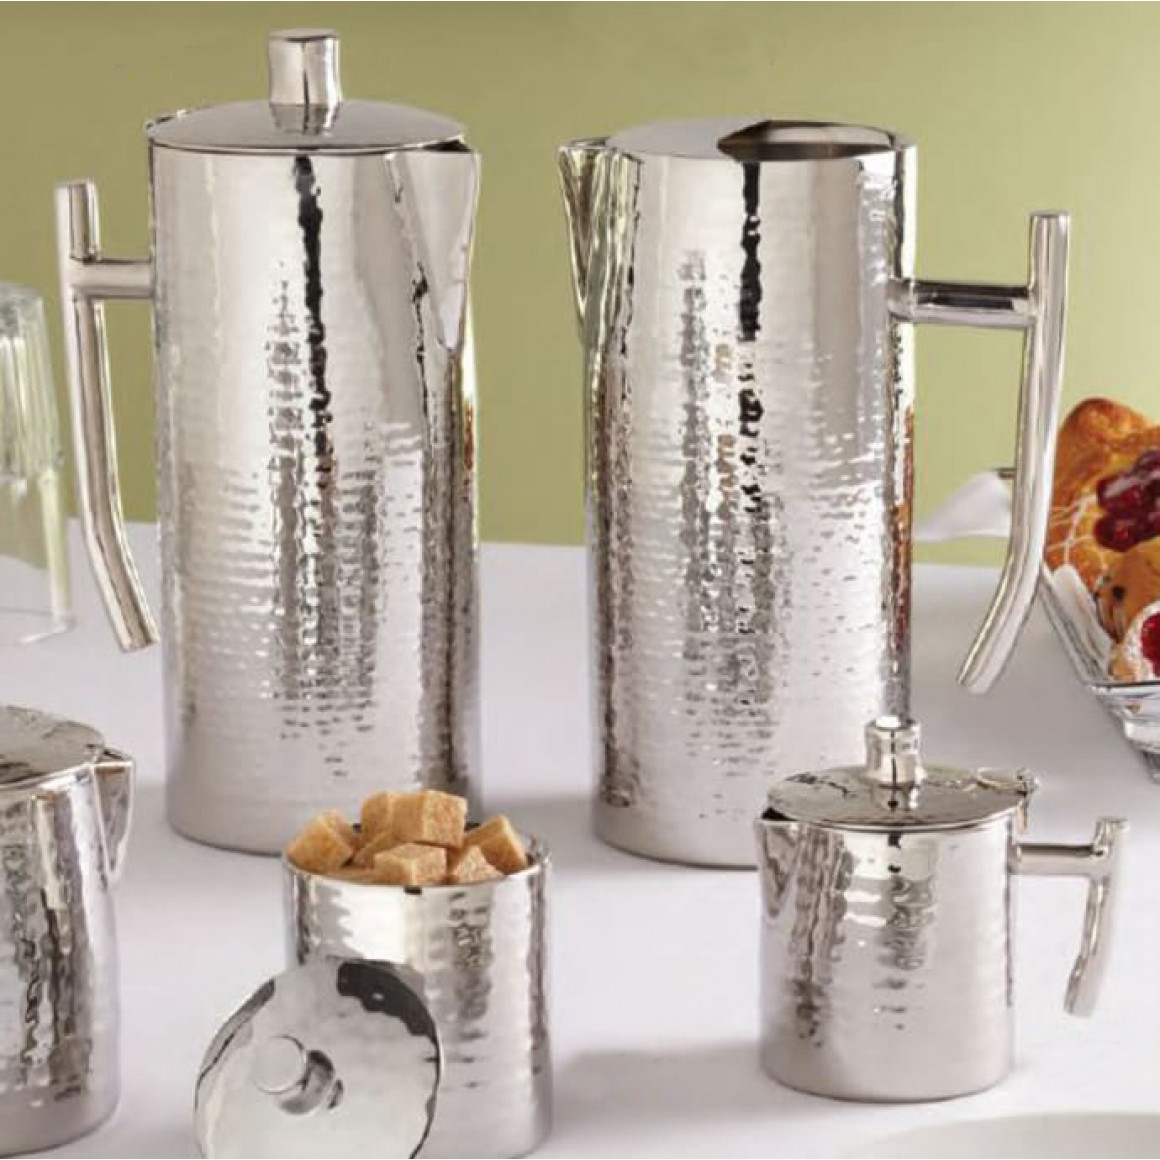 PITCHER, STAINLESS STEEL, ELITE™, HAMMERED, DOUBLE WALL, 64 OZ.